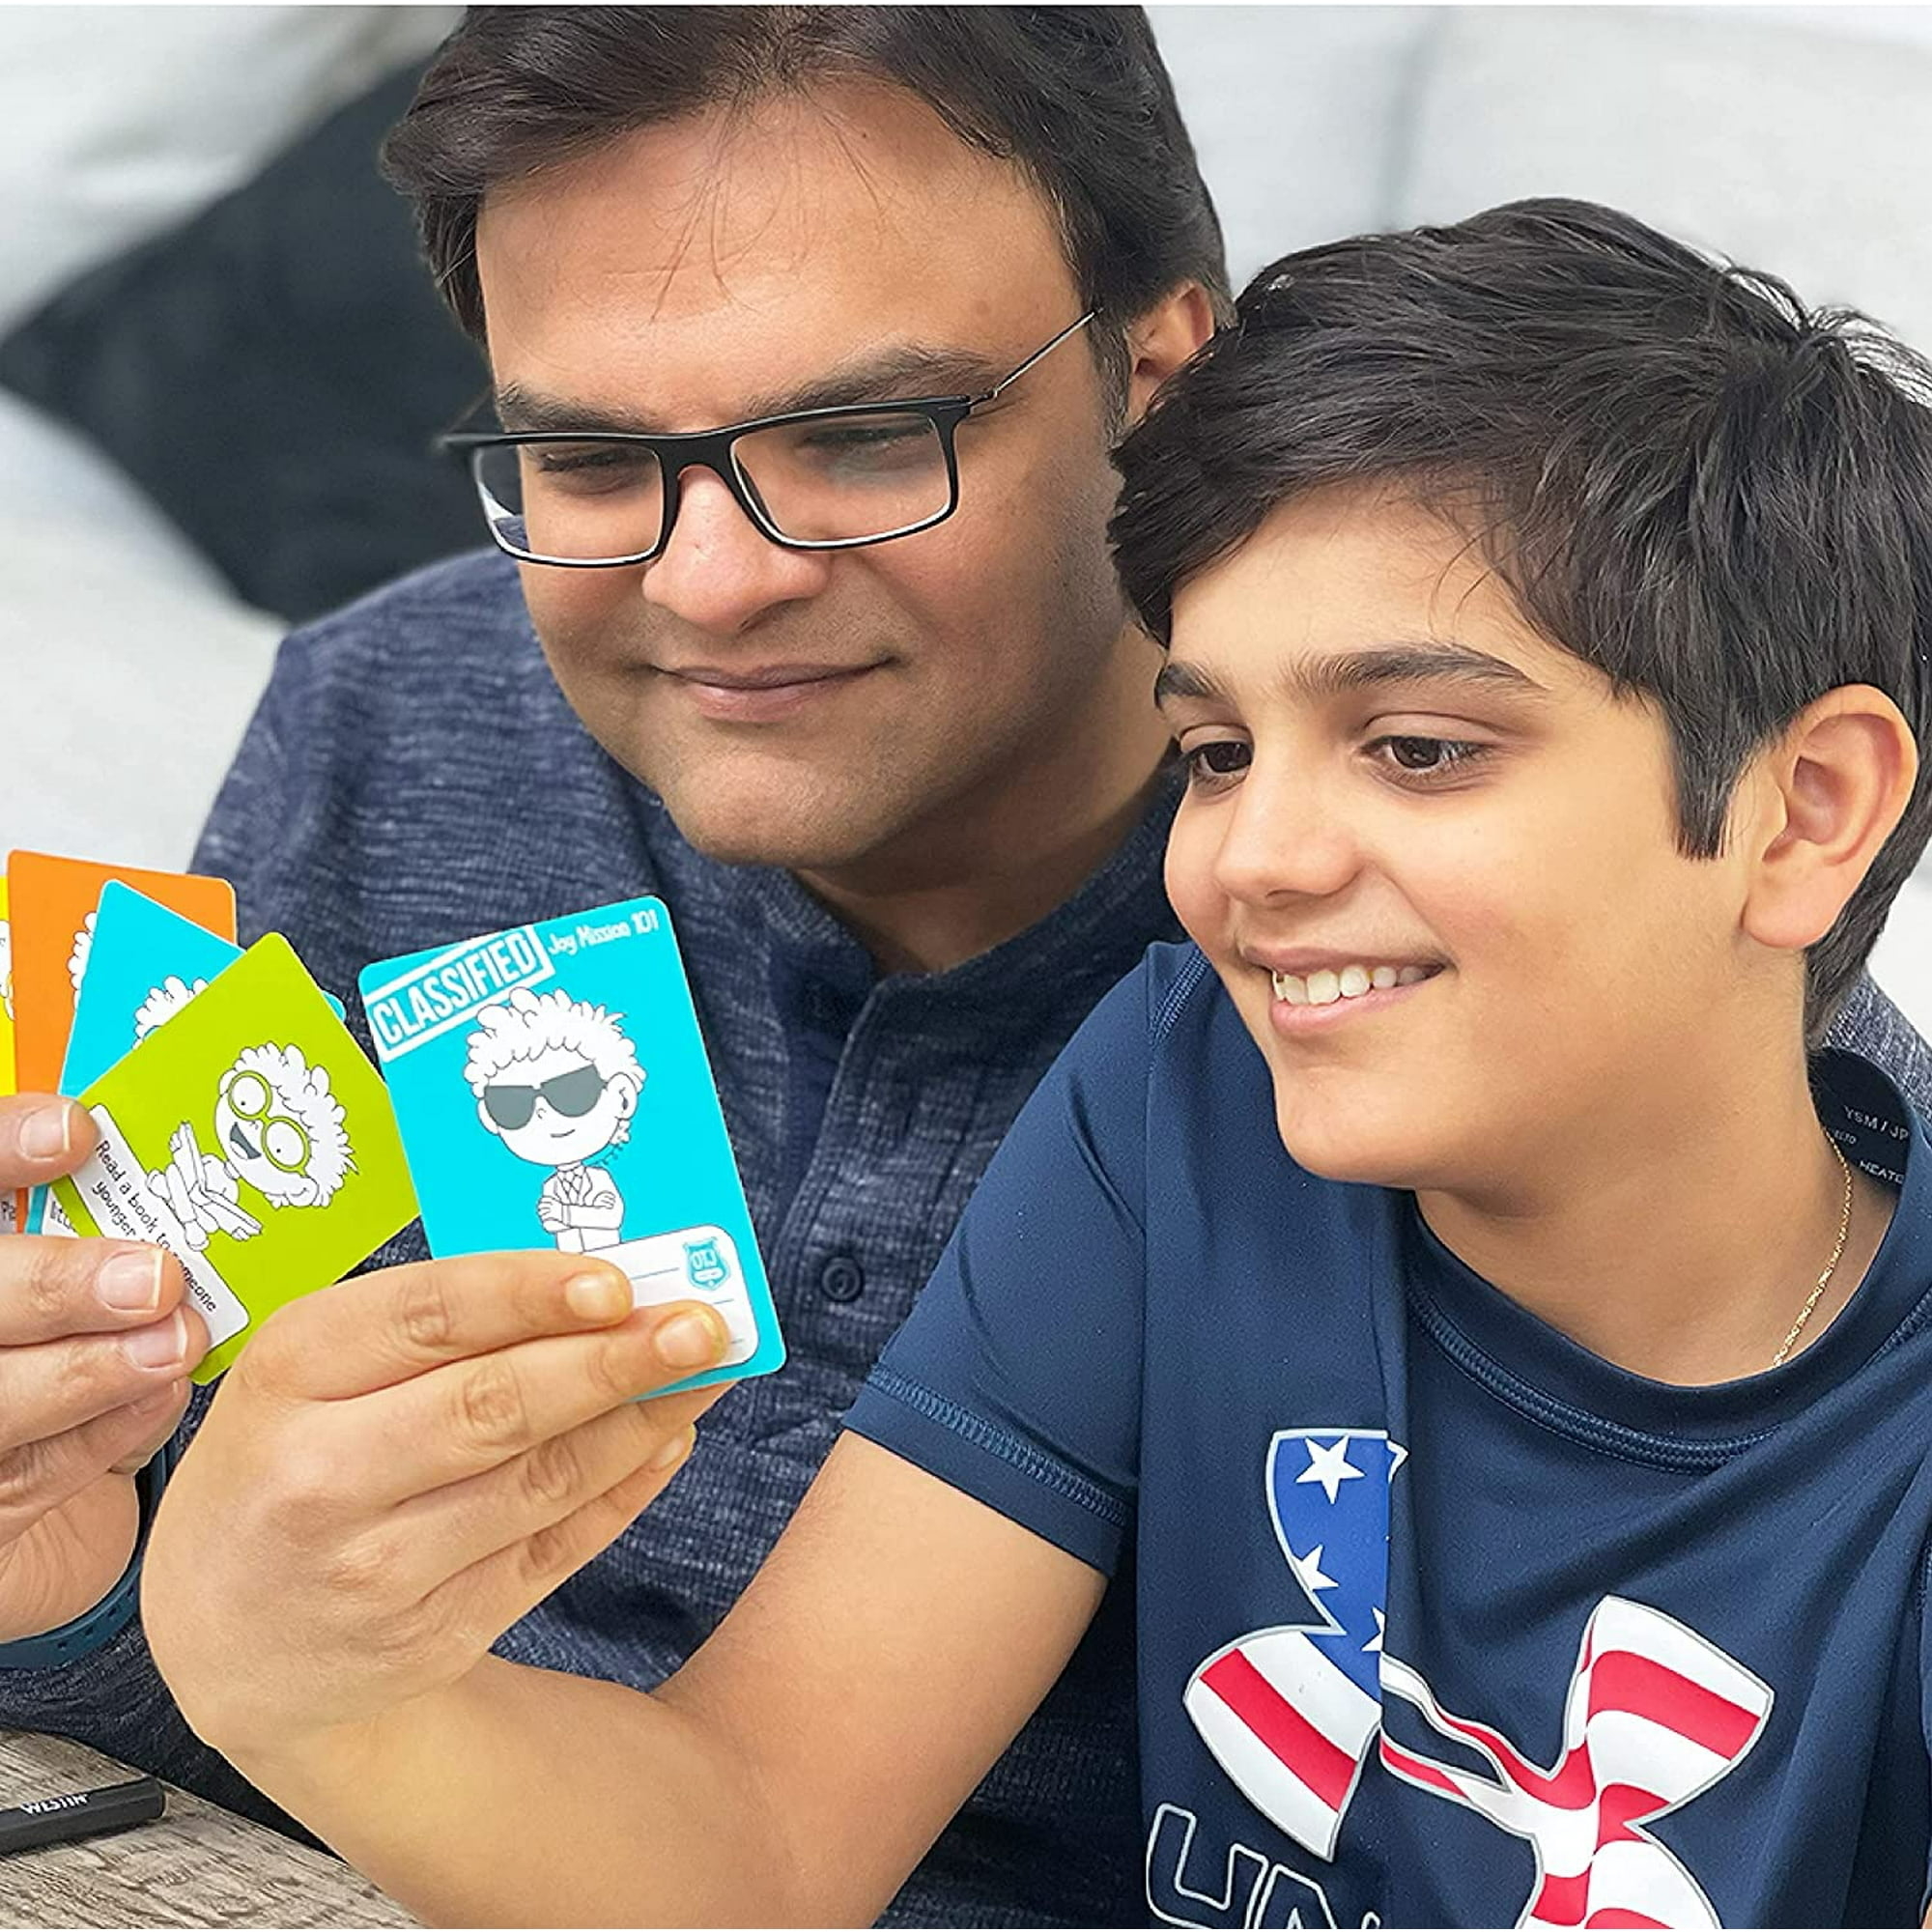 A father and son reading instructions on the cards